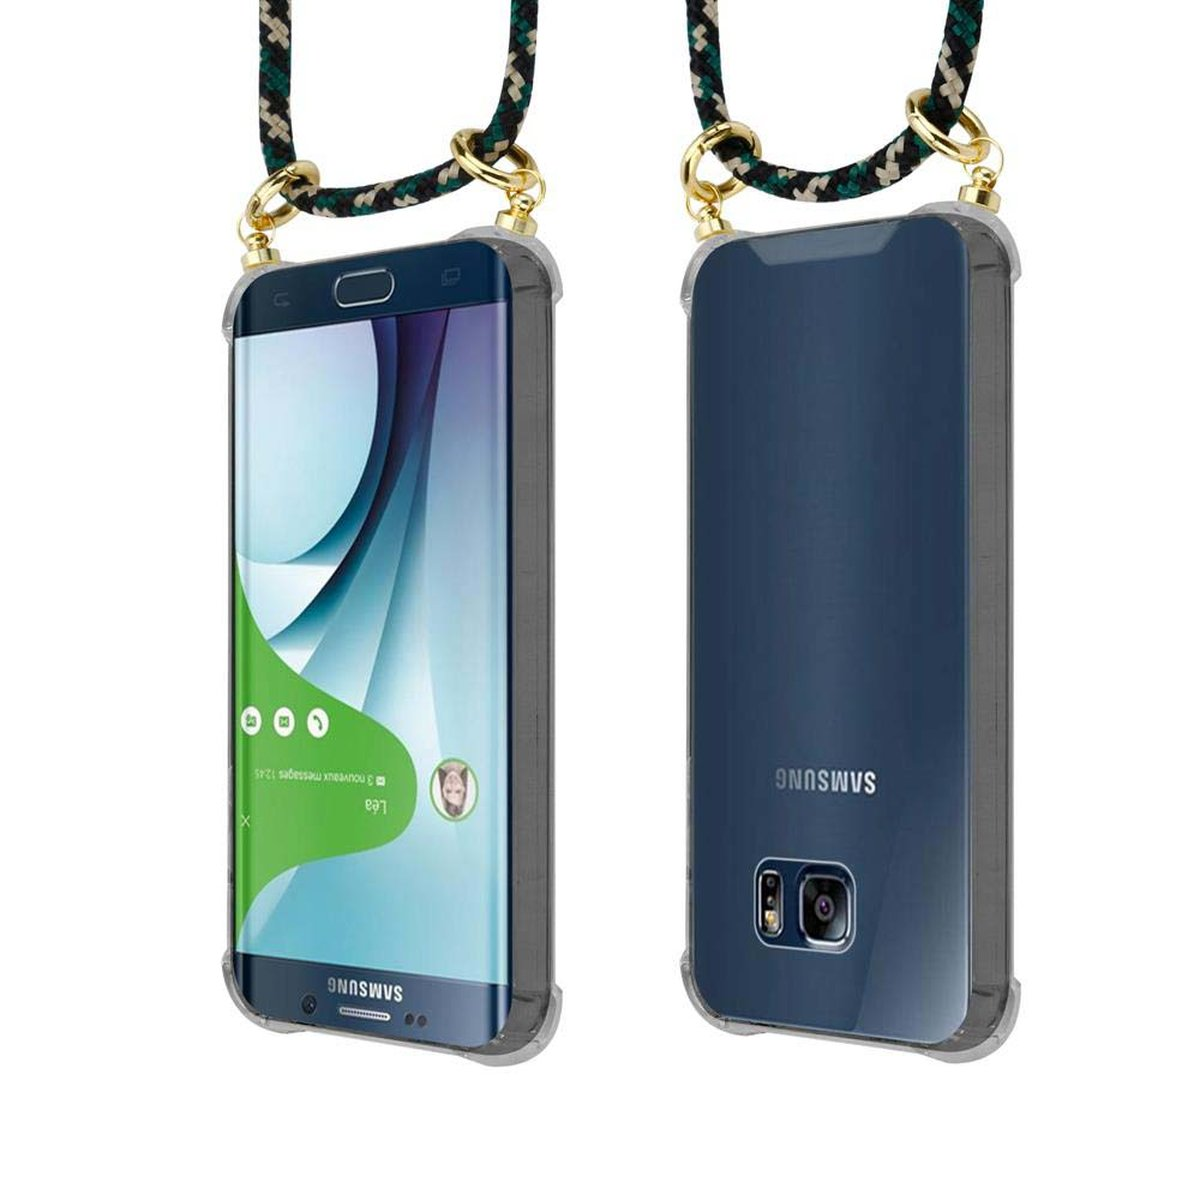 Galaxy Ringen, CAMOUFLAGE Backcover, Kordel EDGE, mit Band und Handy Samsung, CADORABO Hülle, Kette S6 abnehmbarer Gold